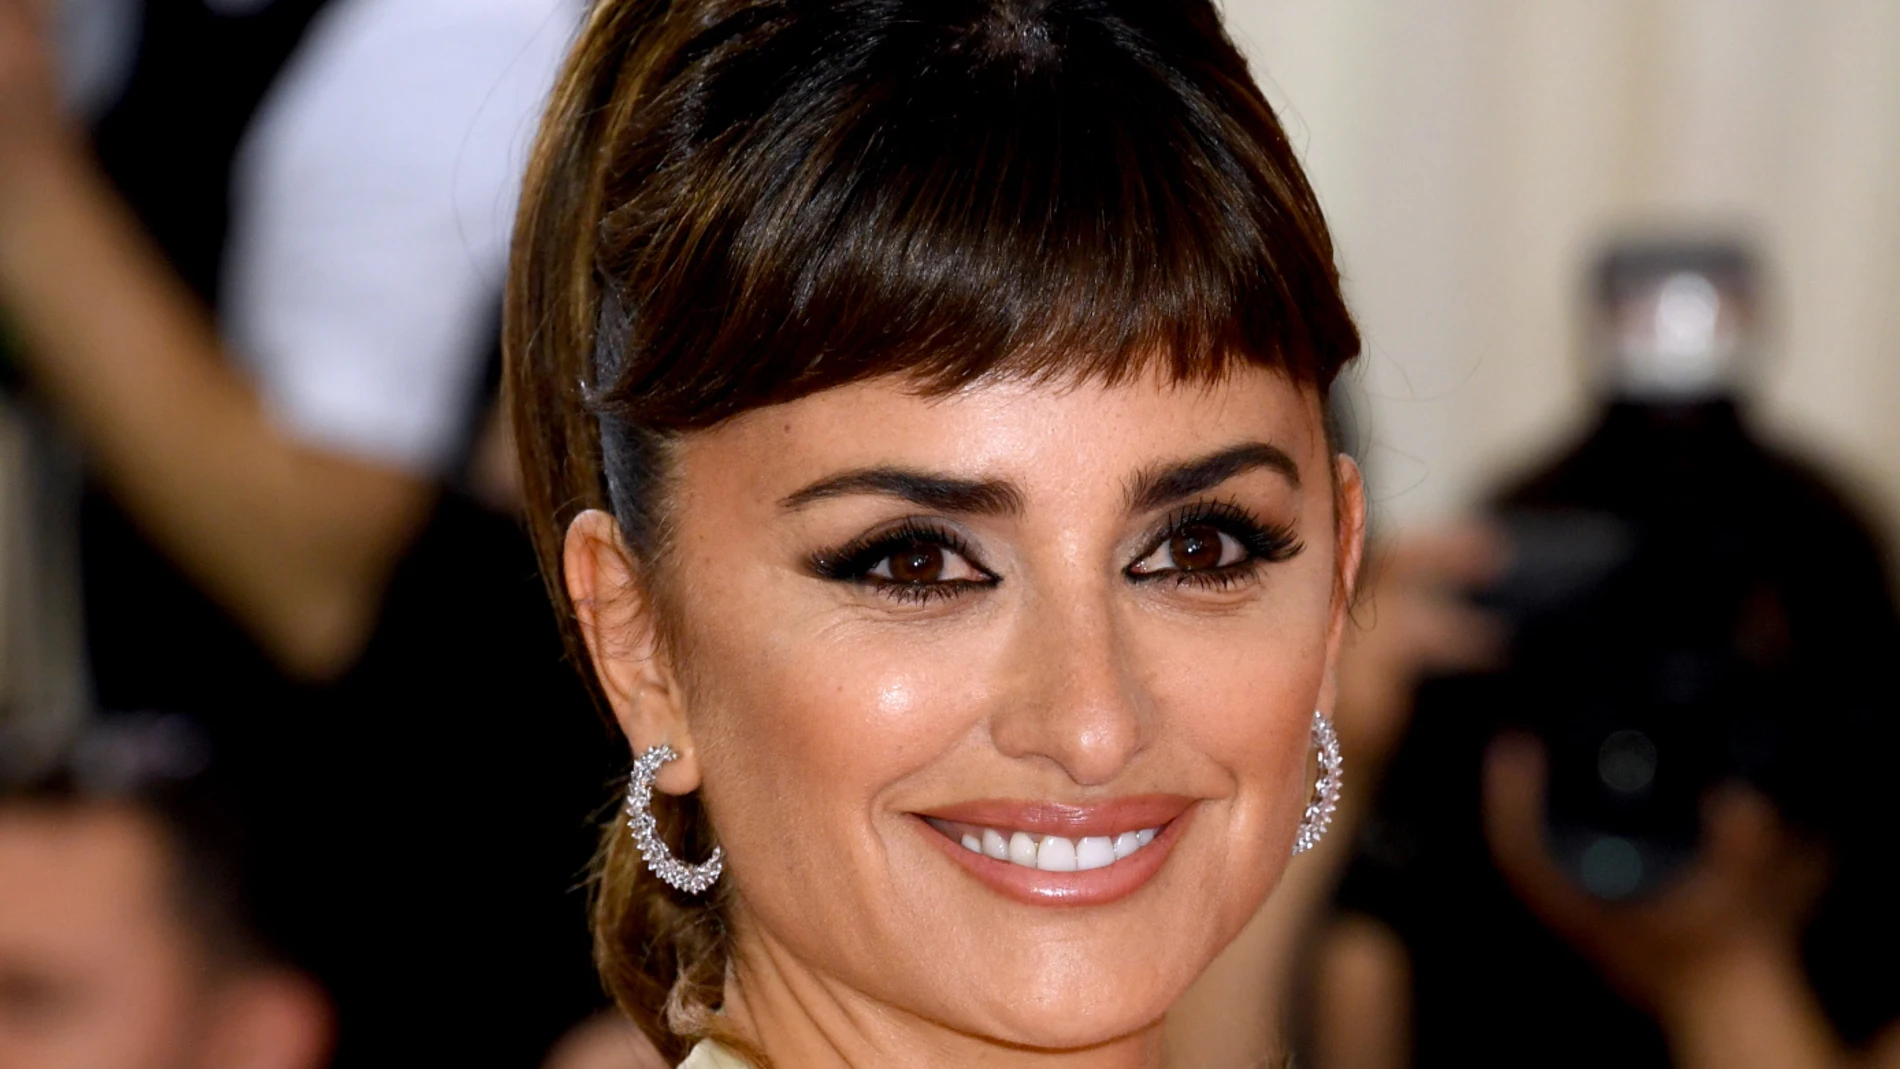 Actress Penelope Cruz at The Metropolitan Museum of Art's Costume Institute benefit gala celebrating the opening of the "Camp: Notes on Fashion" exhibition on Monday, May 6, 2019, in New York.